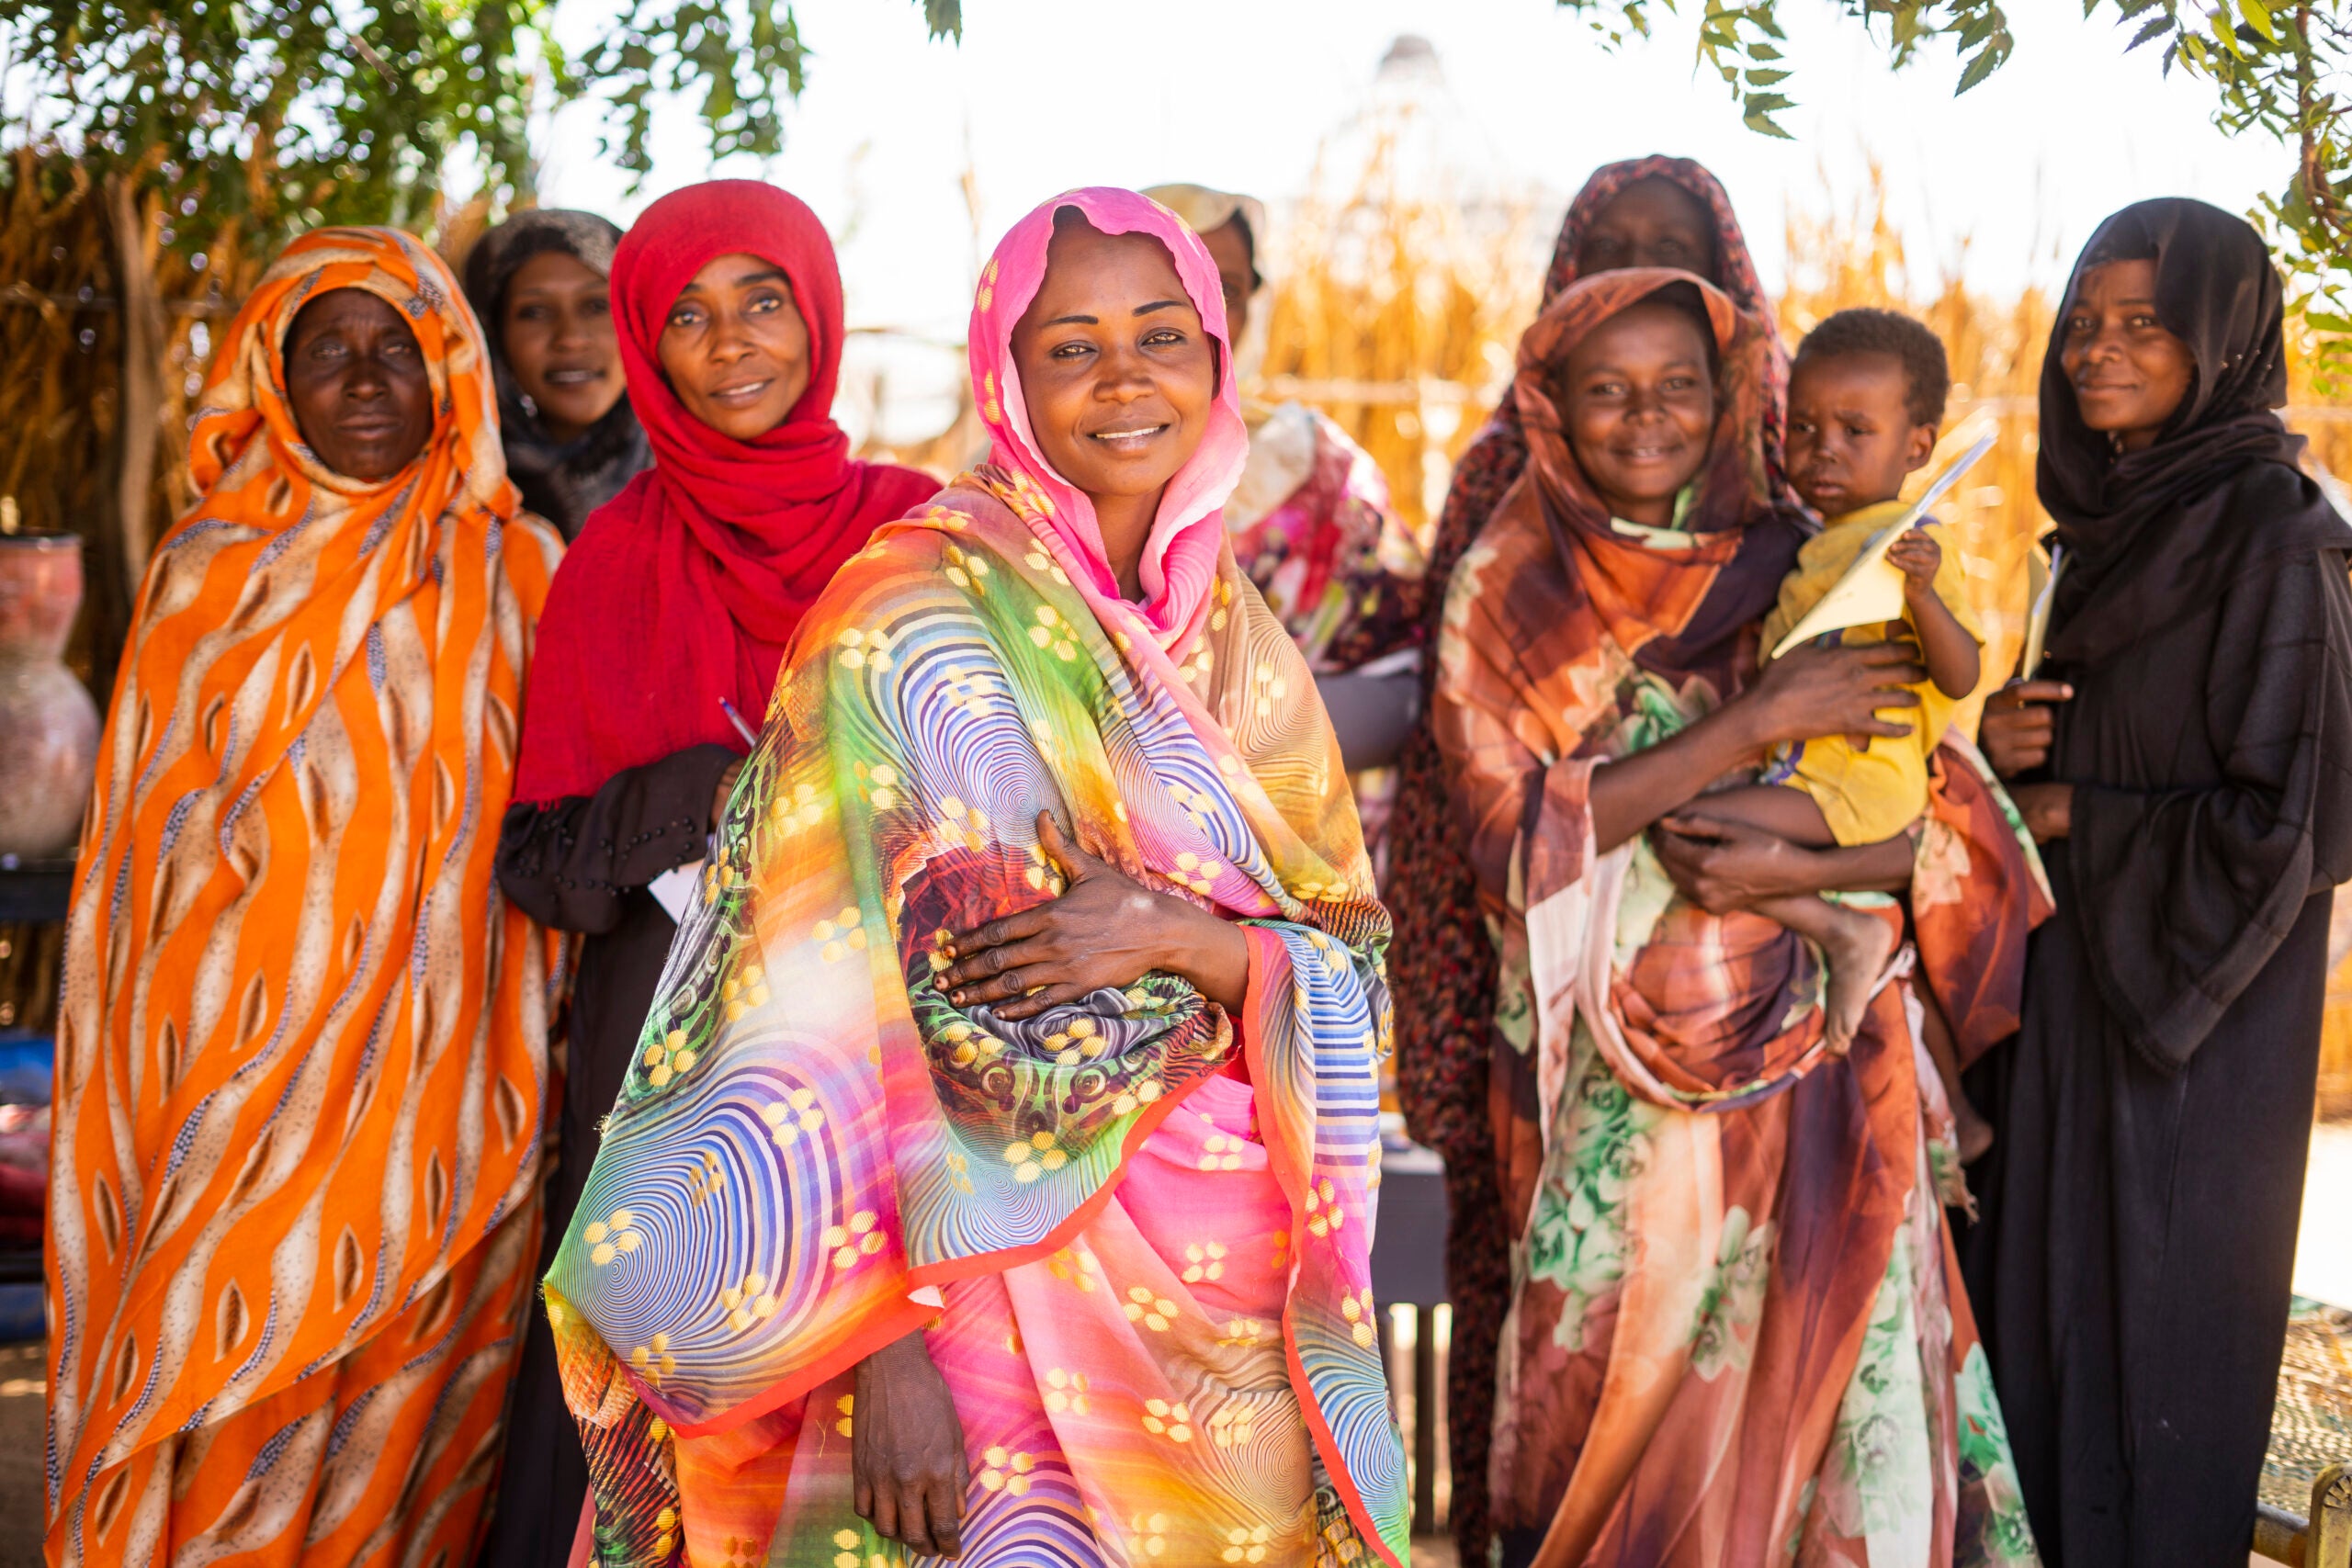 A group of Sudanese women in colorful clothing